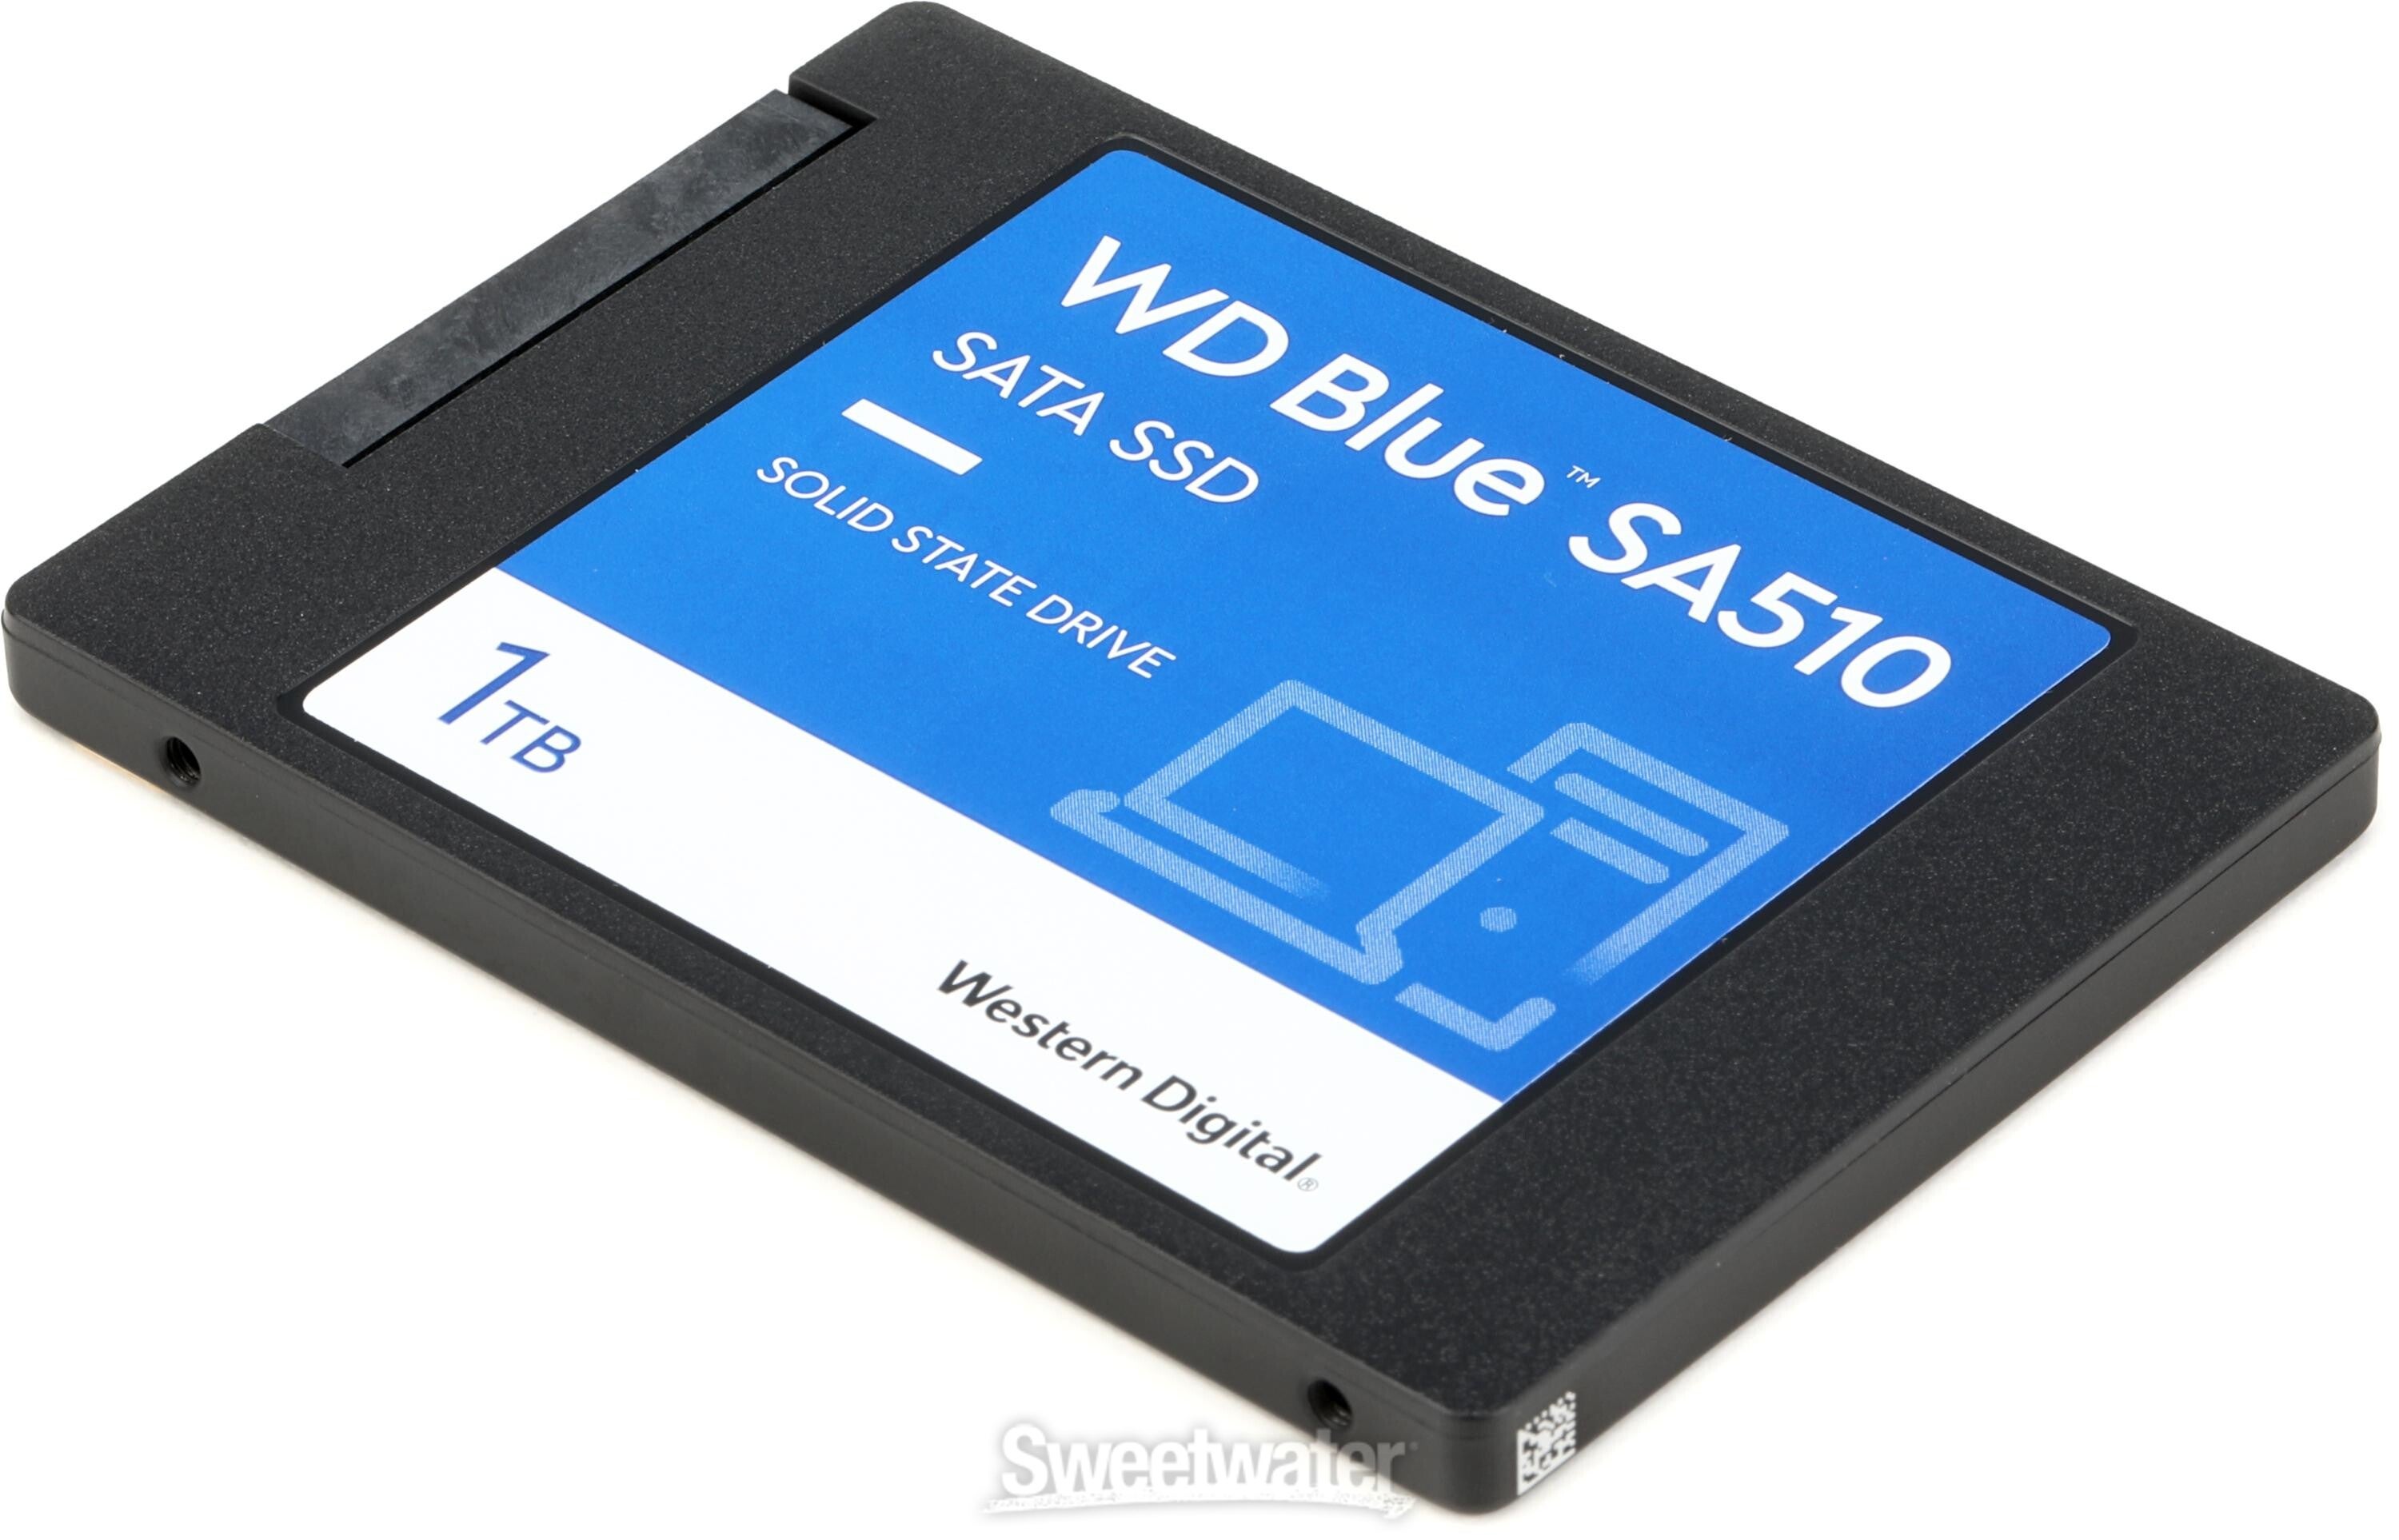 WD Blue SA510 1TB SATA Solid-state Drive | Sweetwater